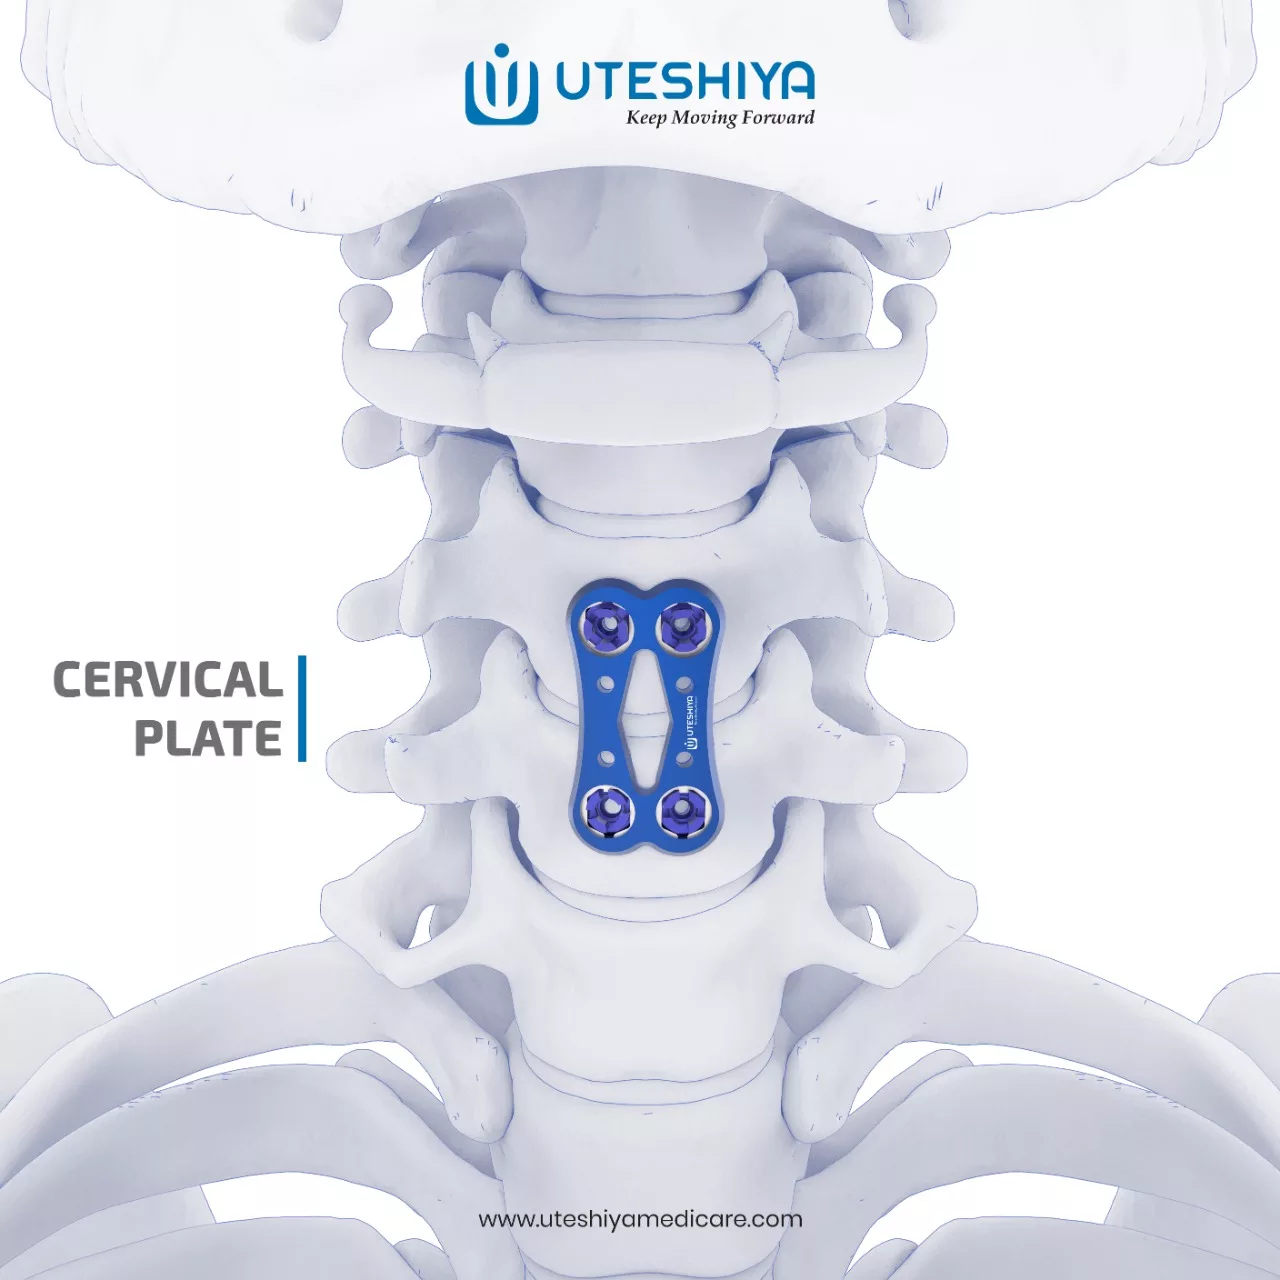 Cervical Plate: Advancements in Spinal Surgery for Neck Stability Cervical Plate: Advancements in Spinal Surgery for Neck Stability Cervical Plate: Advancements in Spinal Surgery for Neck Stability